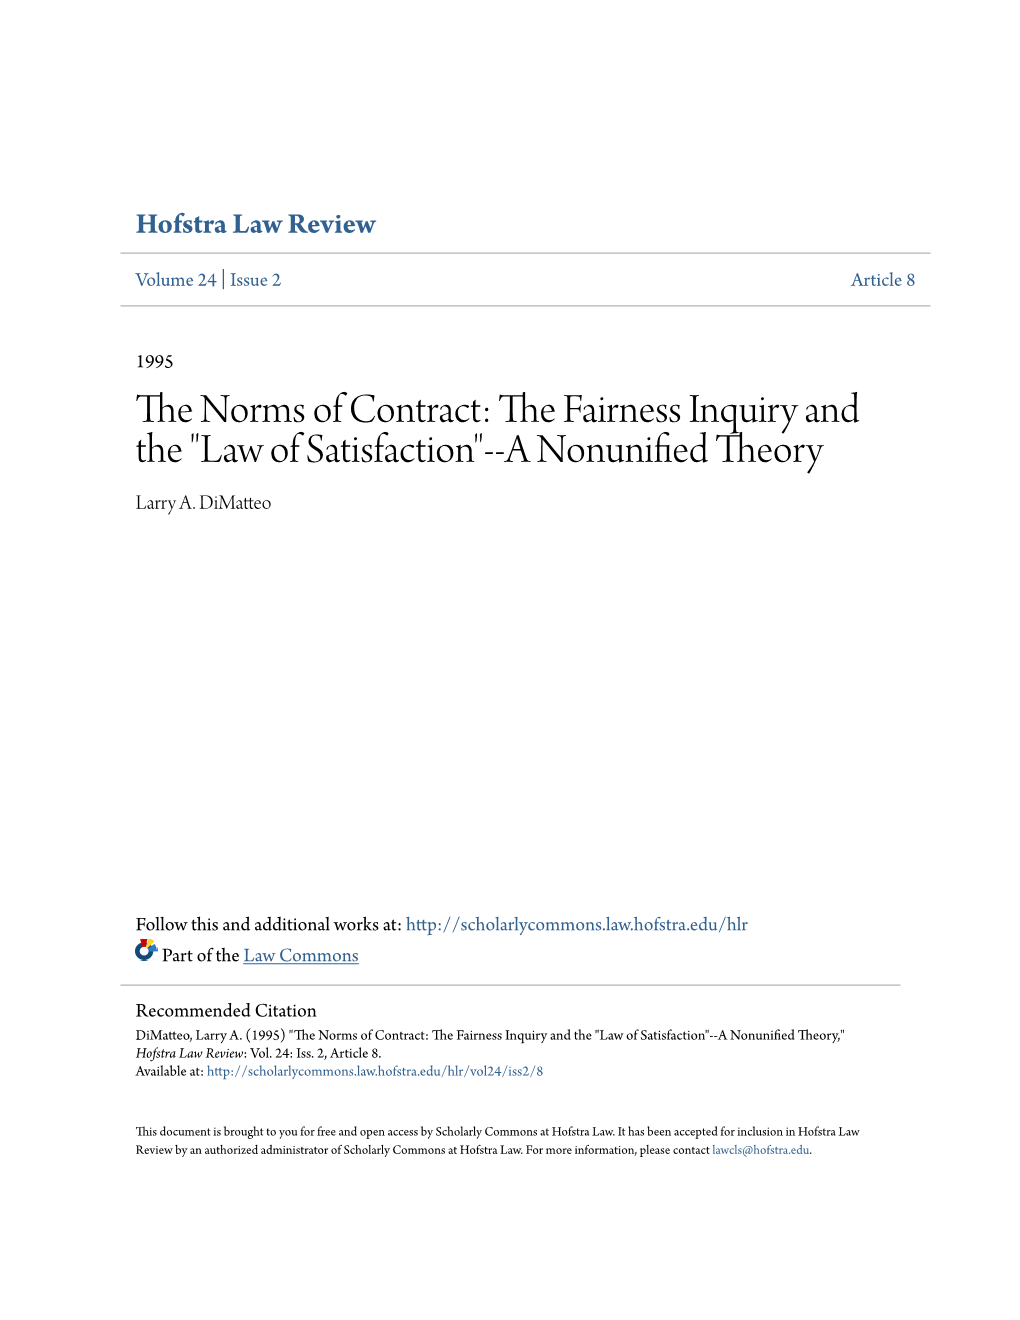 The Norms of Contract: the Fairness Inquiry and the "Law of Satis the NORMS of CONTRACT: the FAIRNESS INQUIRY and the "LAW of SATISFACTION"--A NONUNIFIED THEORY